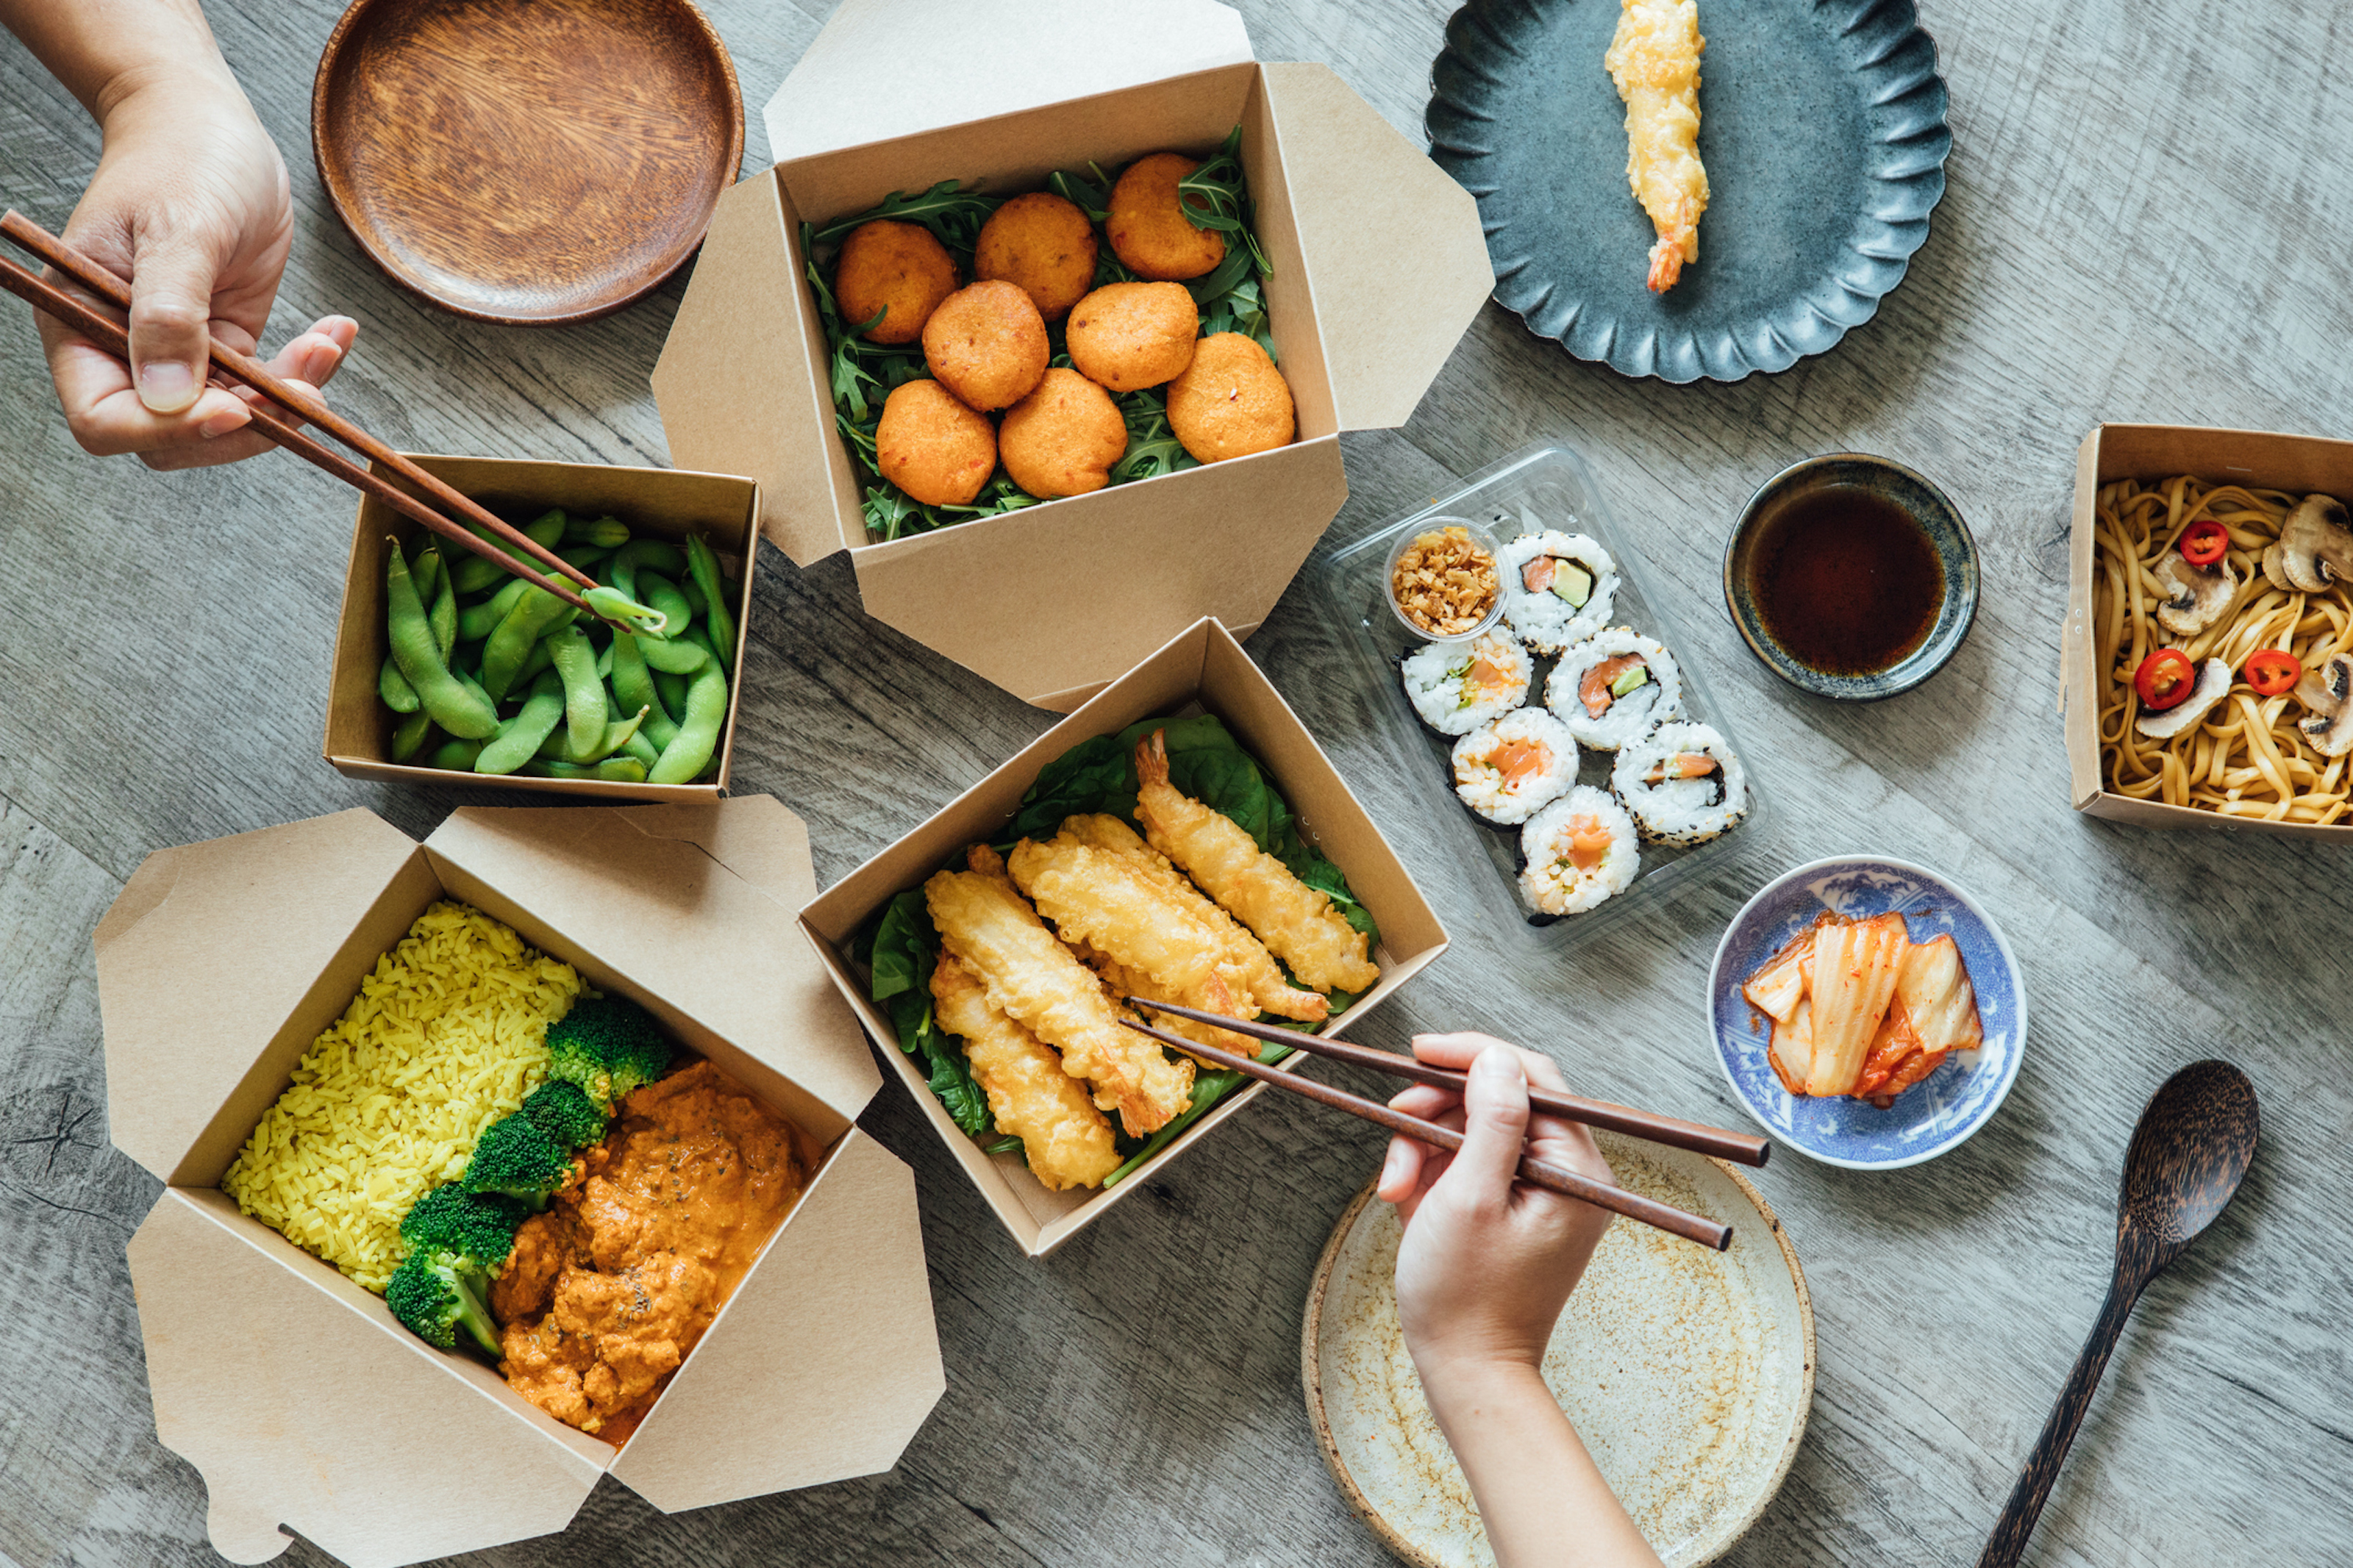 Comparing DoorDash and Uber Eats: Which Food Delivery App is